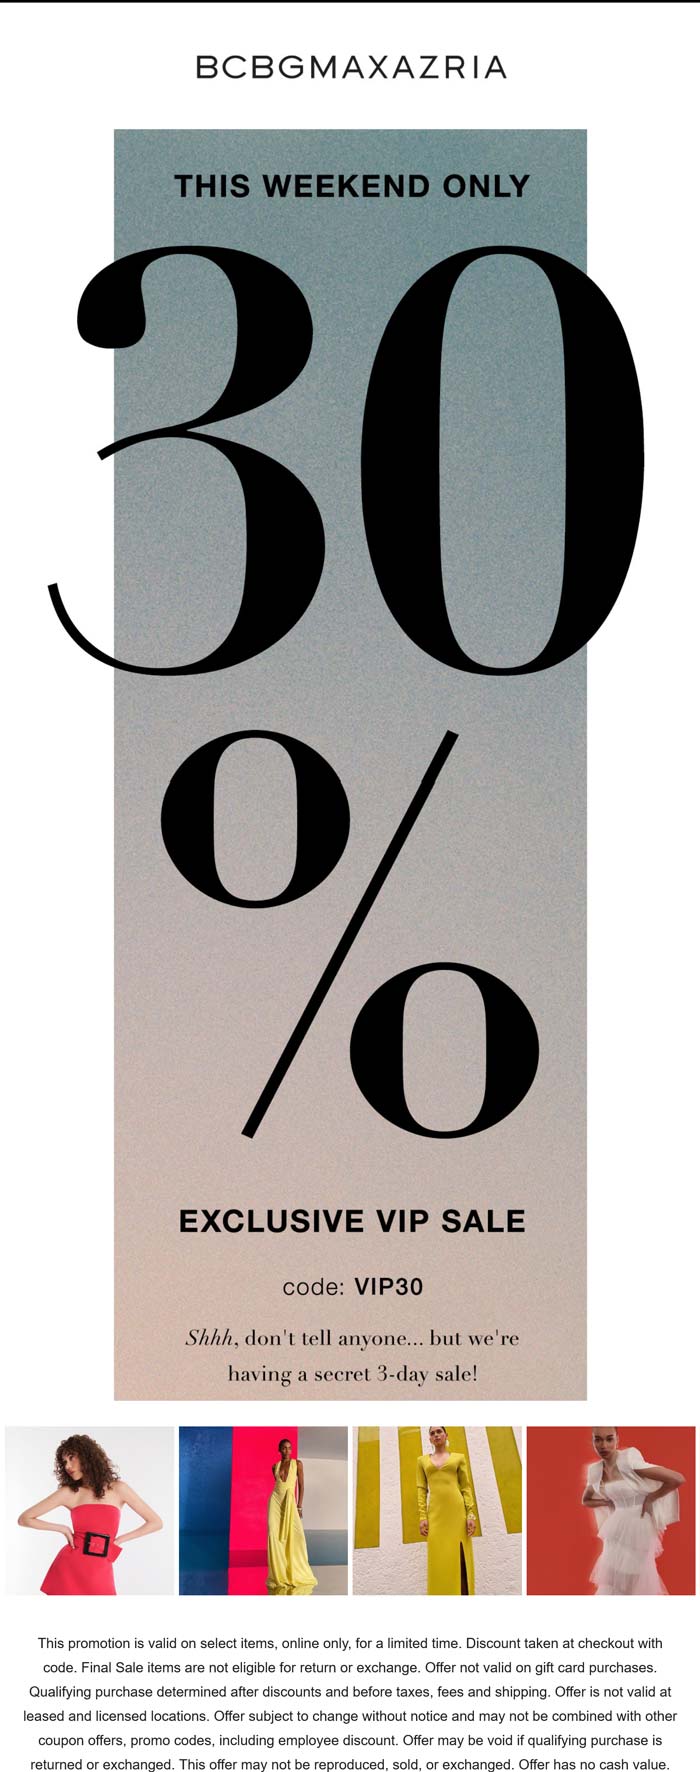 BCBGMAXAZRIA stores Coupon  30% off online at BCBGMAXAZRIA via promo code VIP30 #bcbgmaxazria 